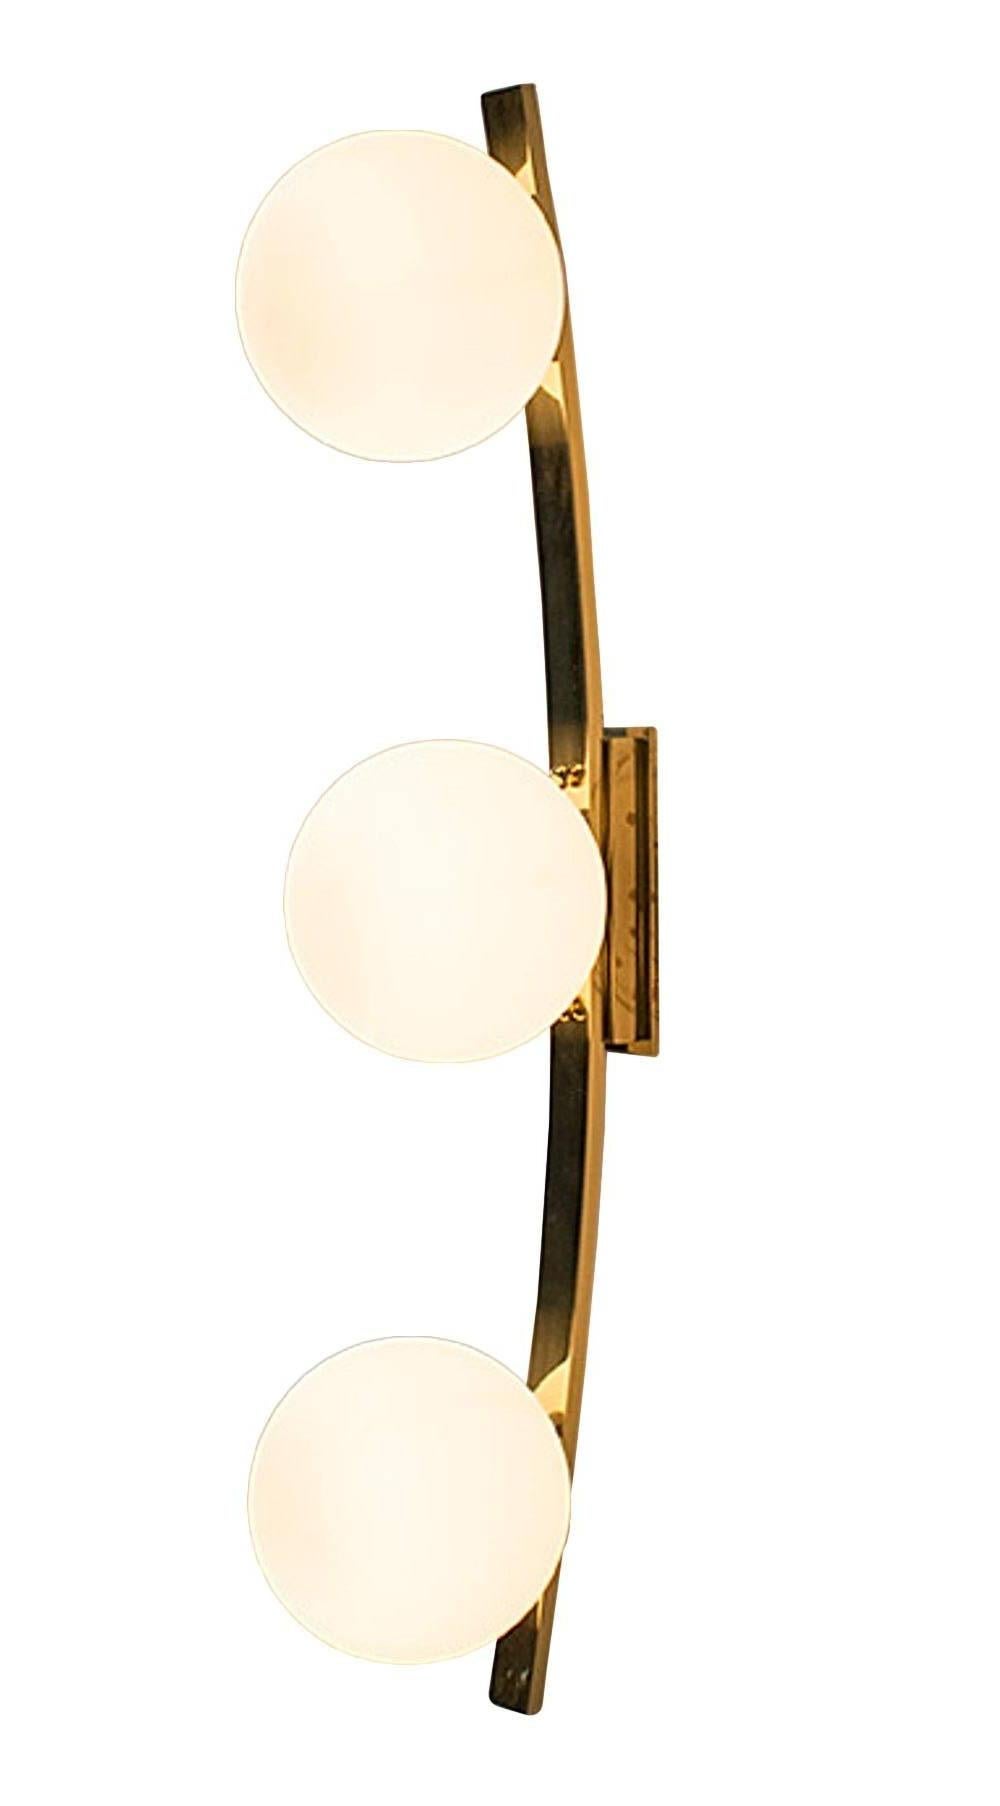 Italian wall light with hand blown matte white Murano glass globes, mounted on curved polished brass finish frame / Designed by Fabio Bergomi / Made in Italy
3 lights / E12 or E14 / max 40 W each
Height: 31.5 inches / Width: 6 inches / Depth: 7.5